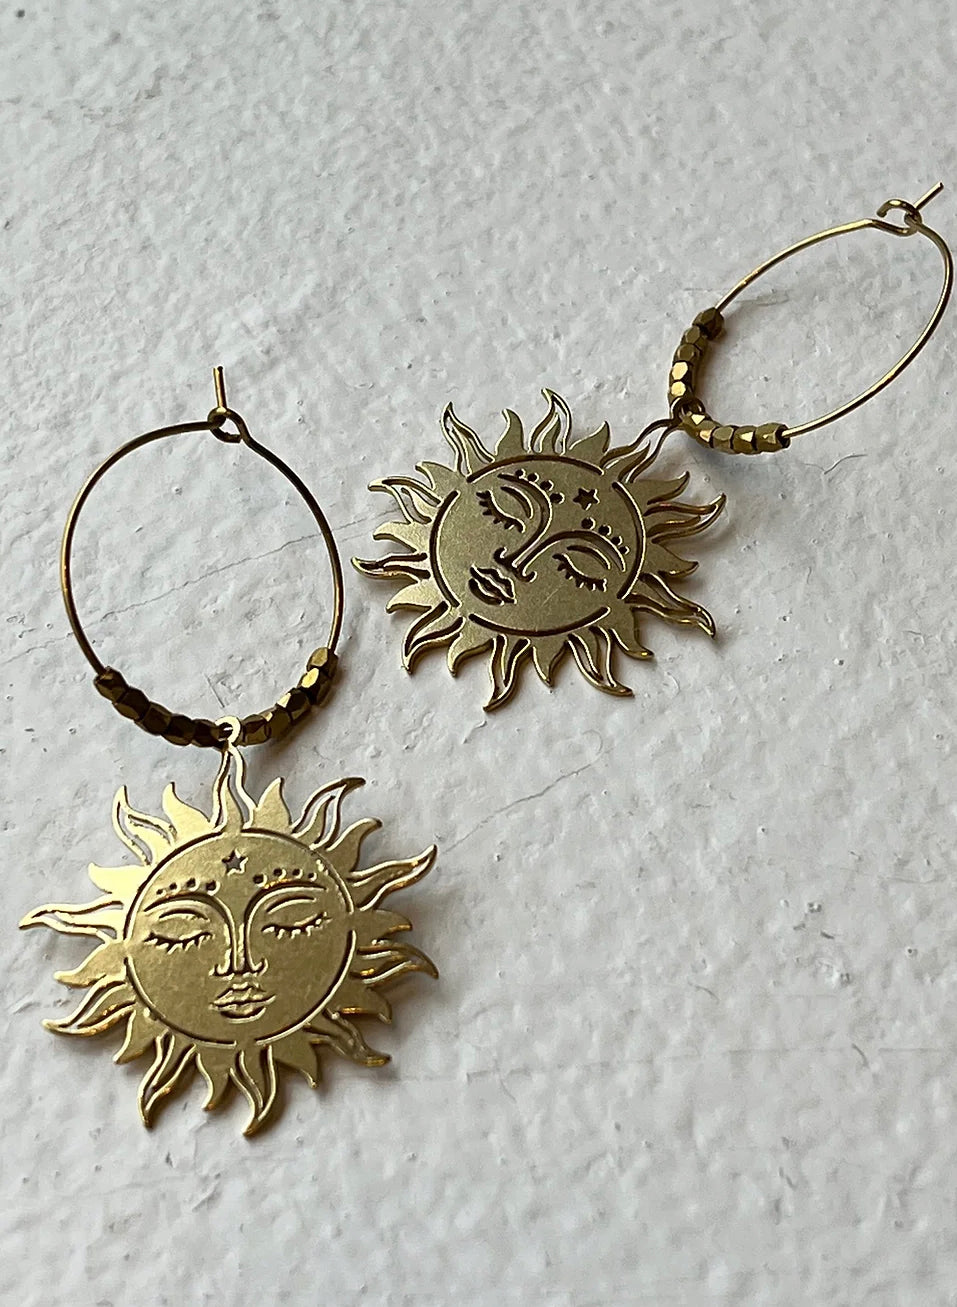 Hoop with Beads and Sun Pendant Earrings